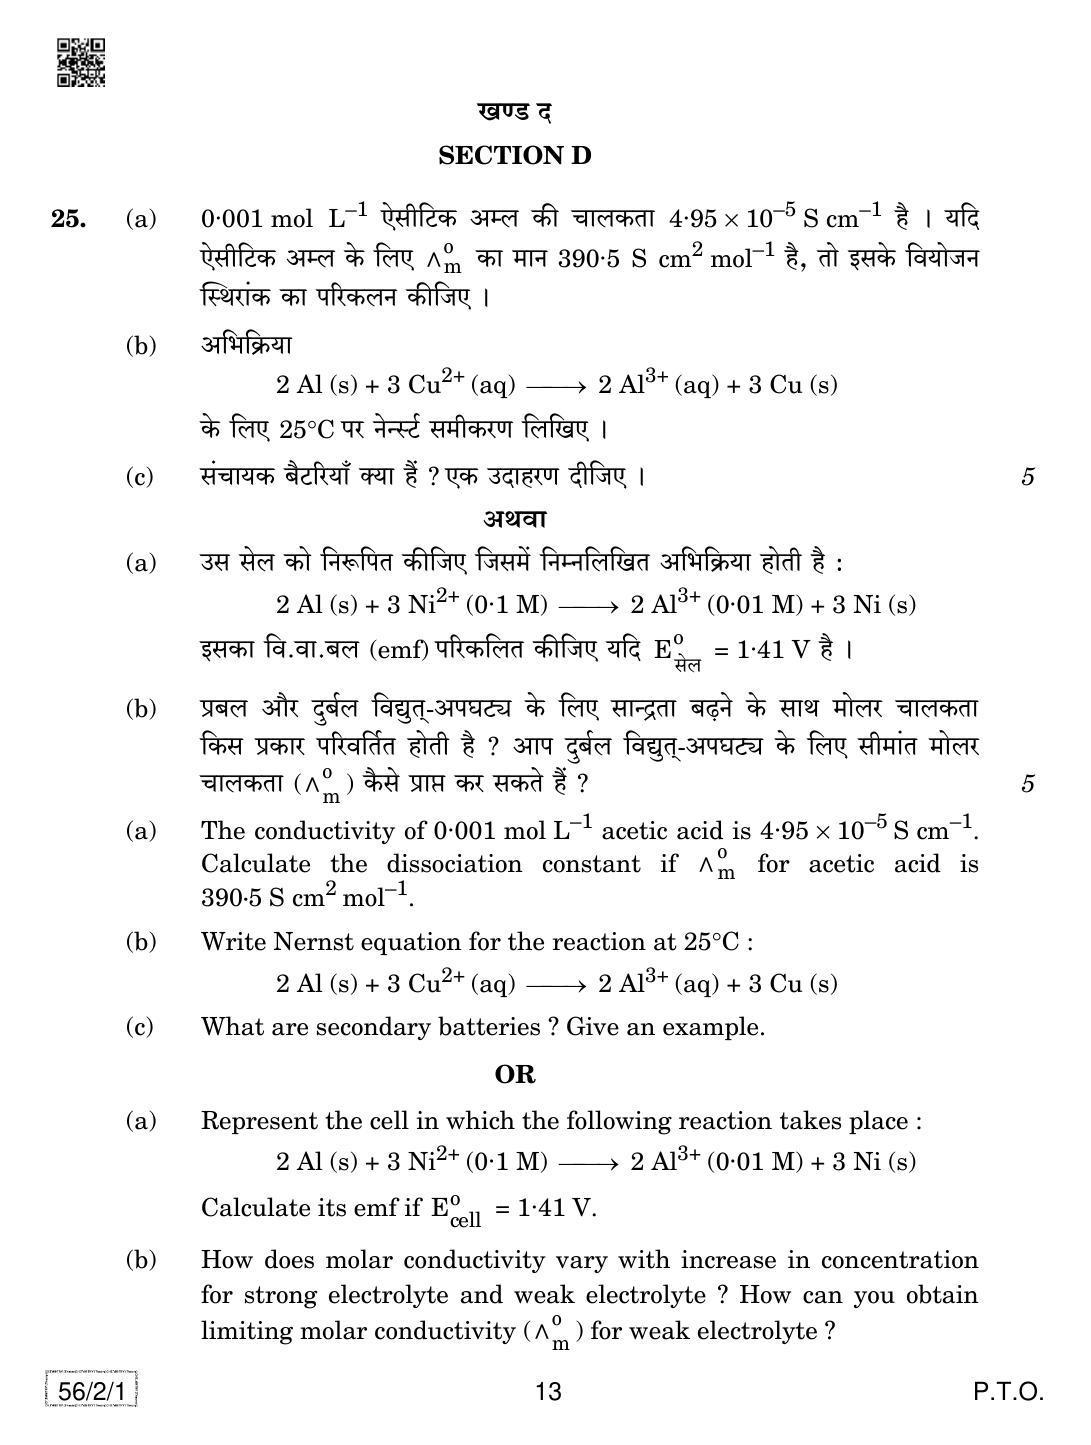 CBSE Class 12 56-2-1 Chemistry 2019 Question Paper - Page 13